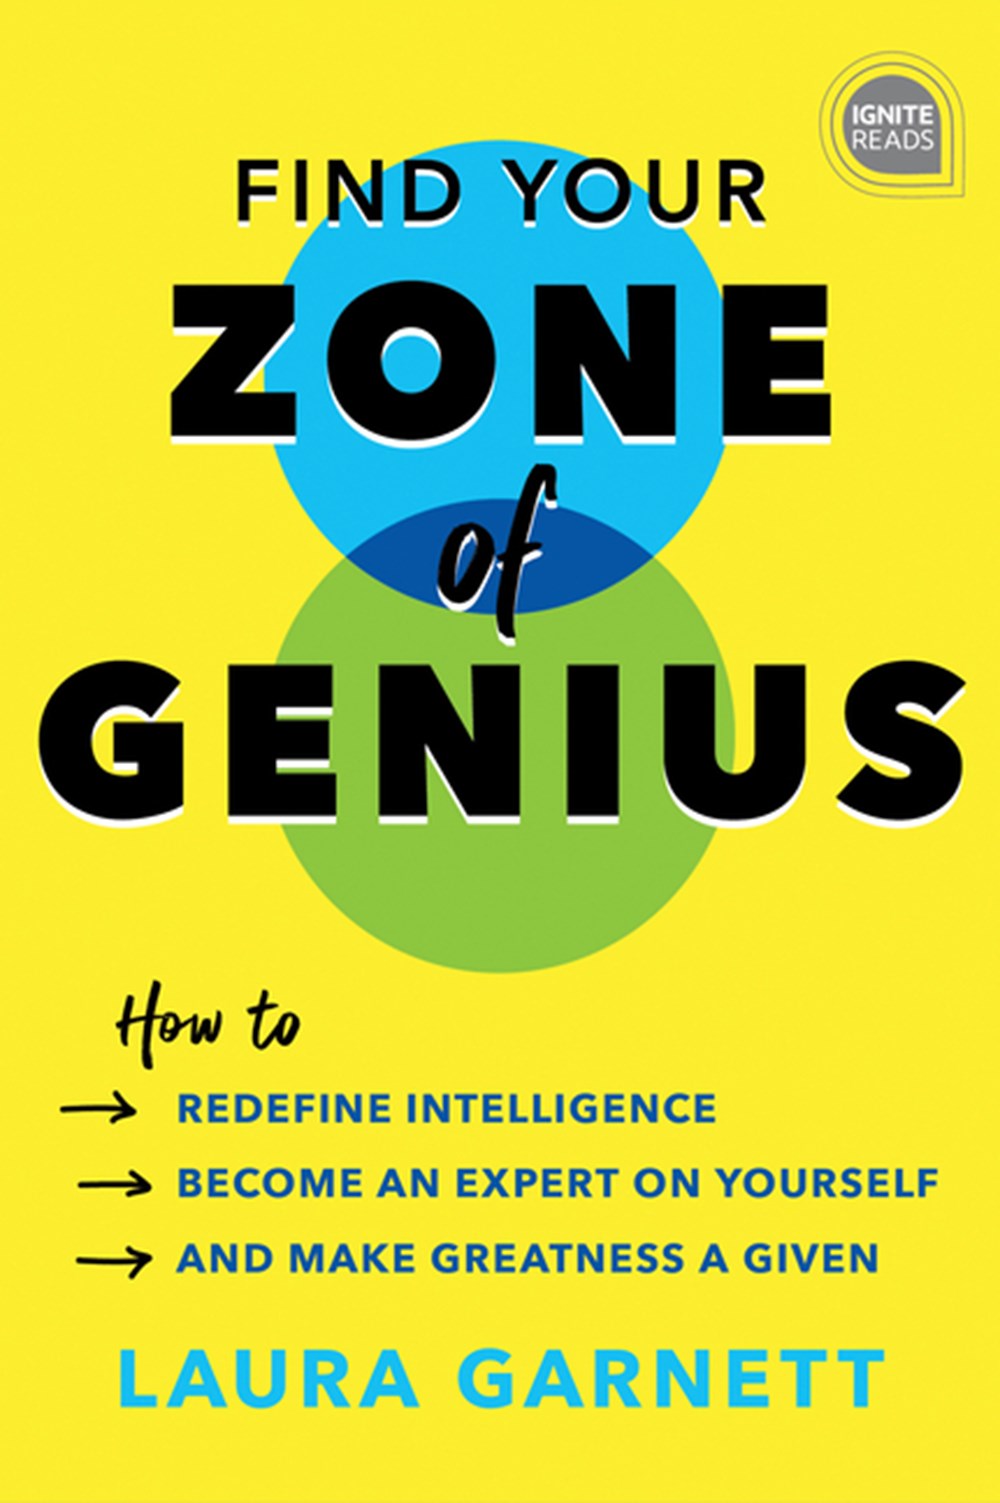 Find Your Zone of Genius: How to Redefine Intelligence, Become an Expert on Yourself, and Make Great